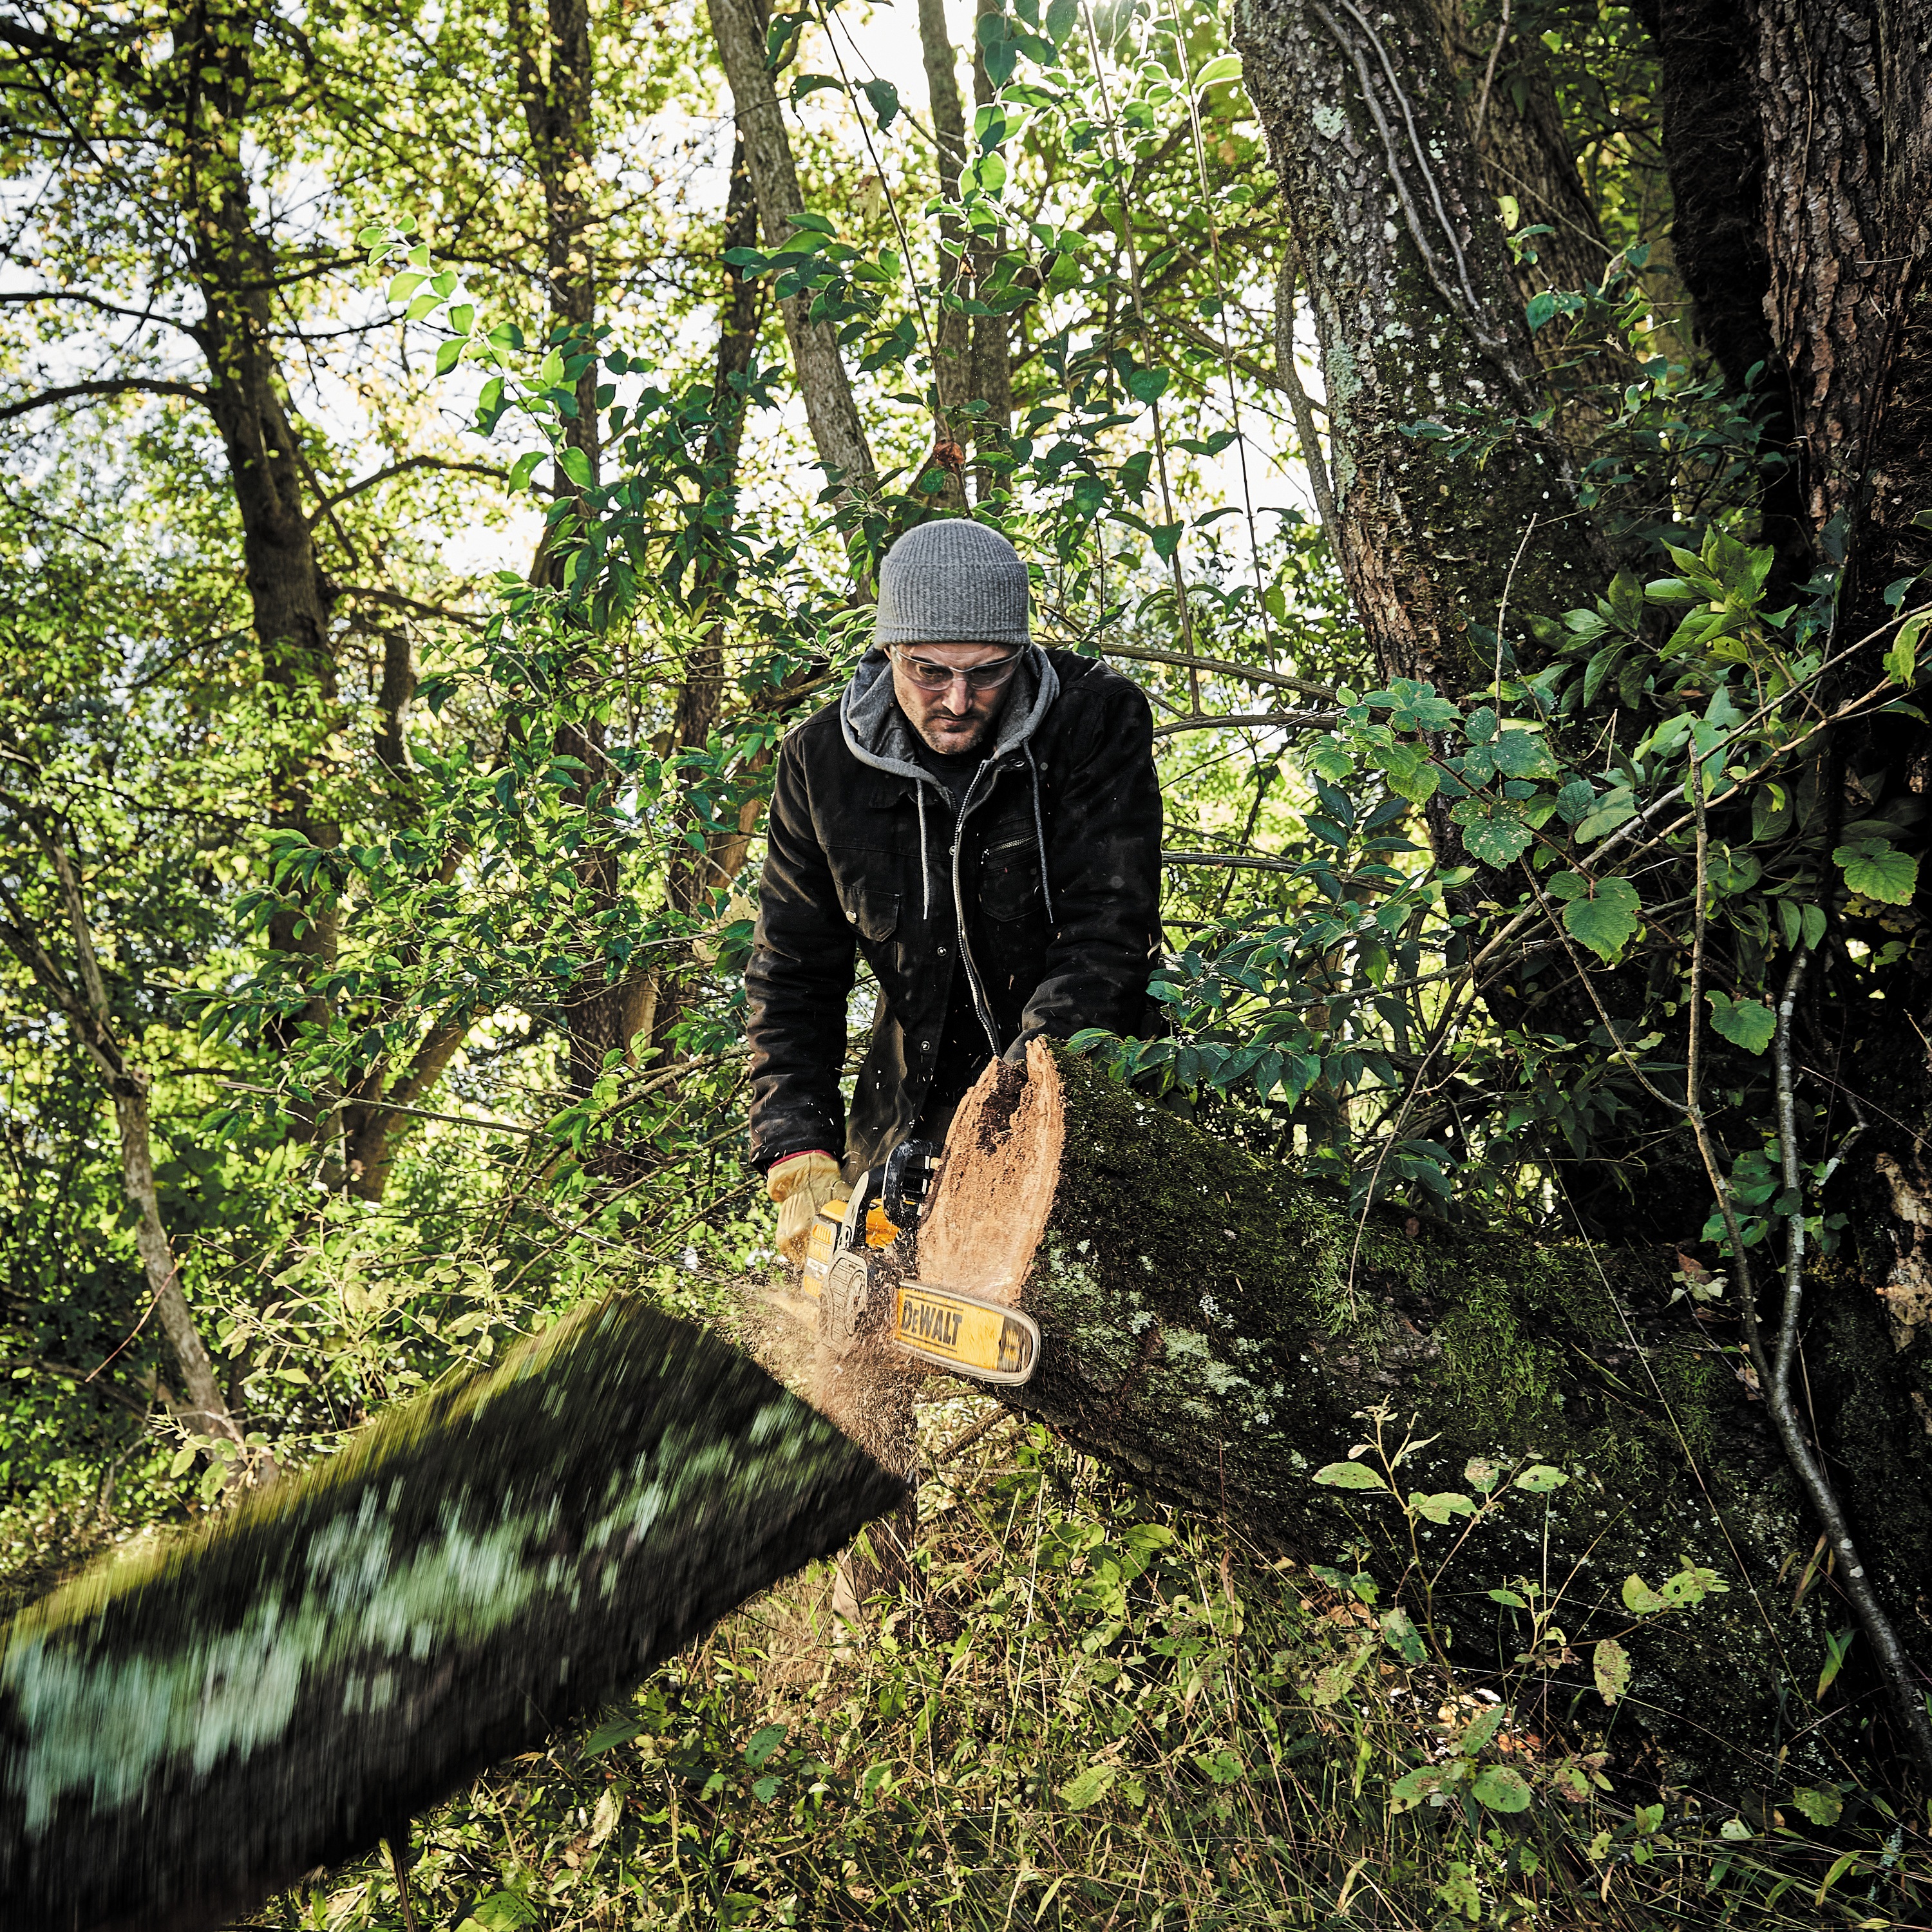 FLEXVOLT Cordless Chainsaw being used by a worker to chop down large tree trunks in  woods